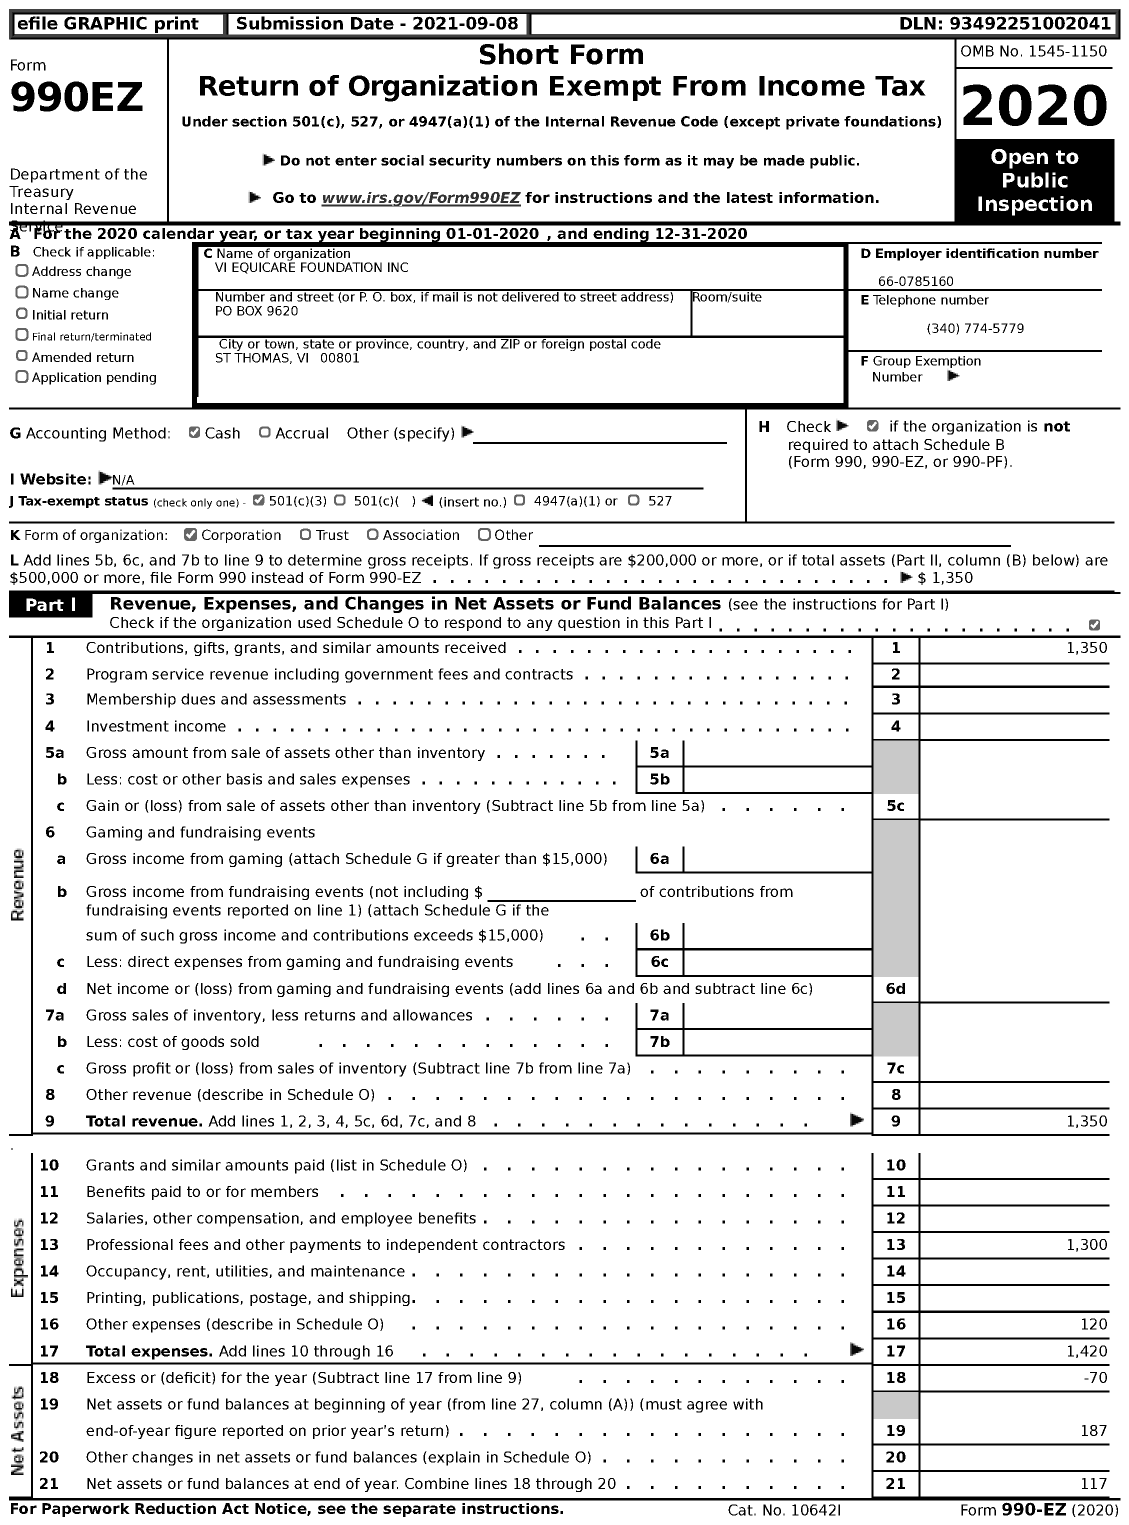 Image of first page of 2020 Form 990EZ for Vi Equicare Foundation